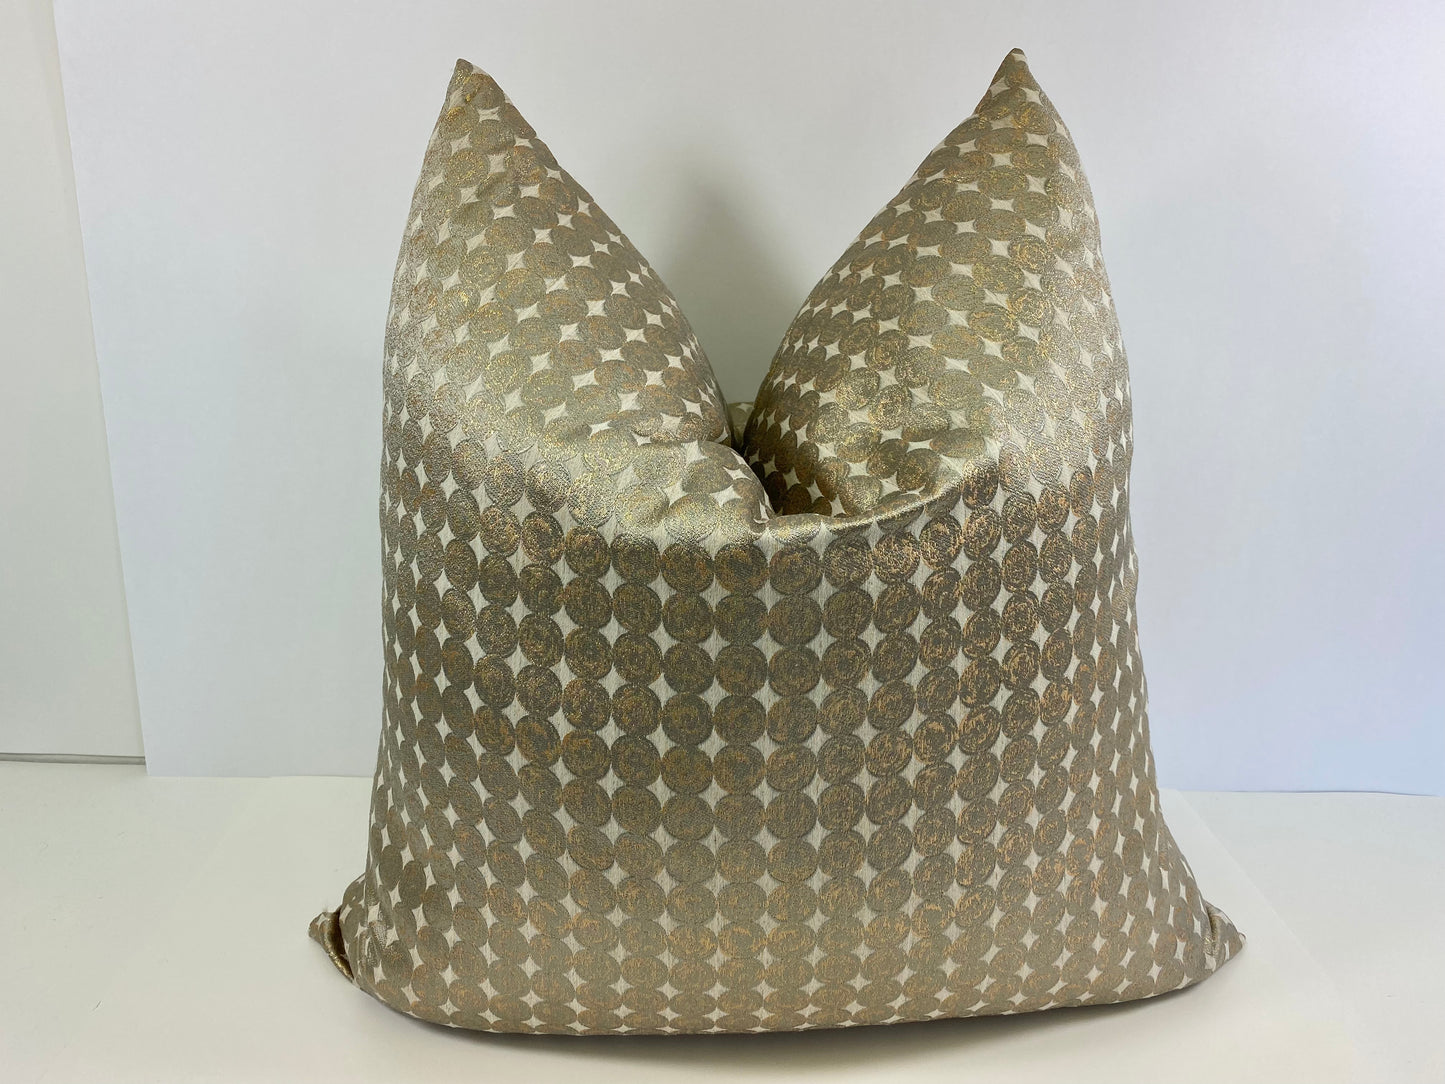 REDUCED TO CLEAR Luxury Pillow; 24" x 24" - Francis, dots of shimmering gold over taupe cast on a cream background